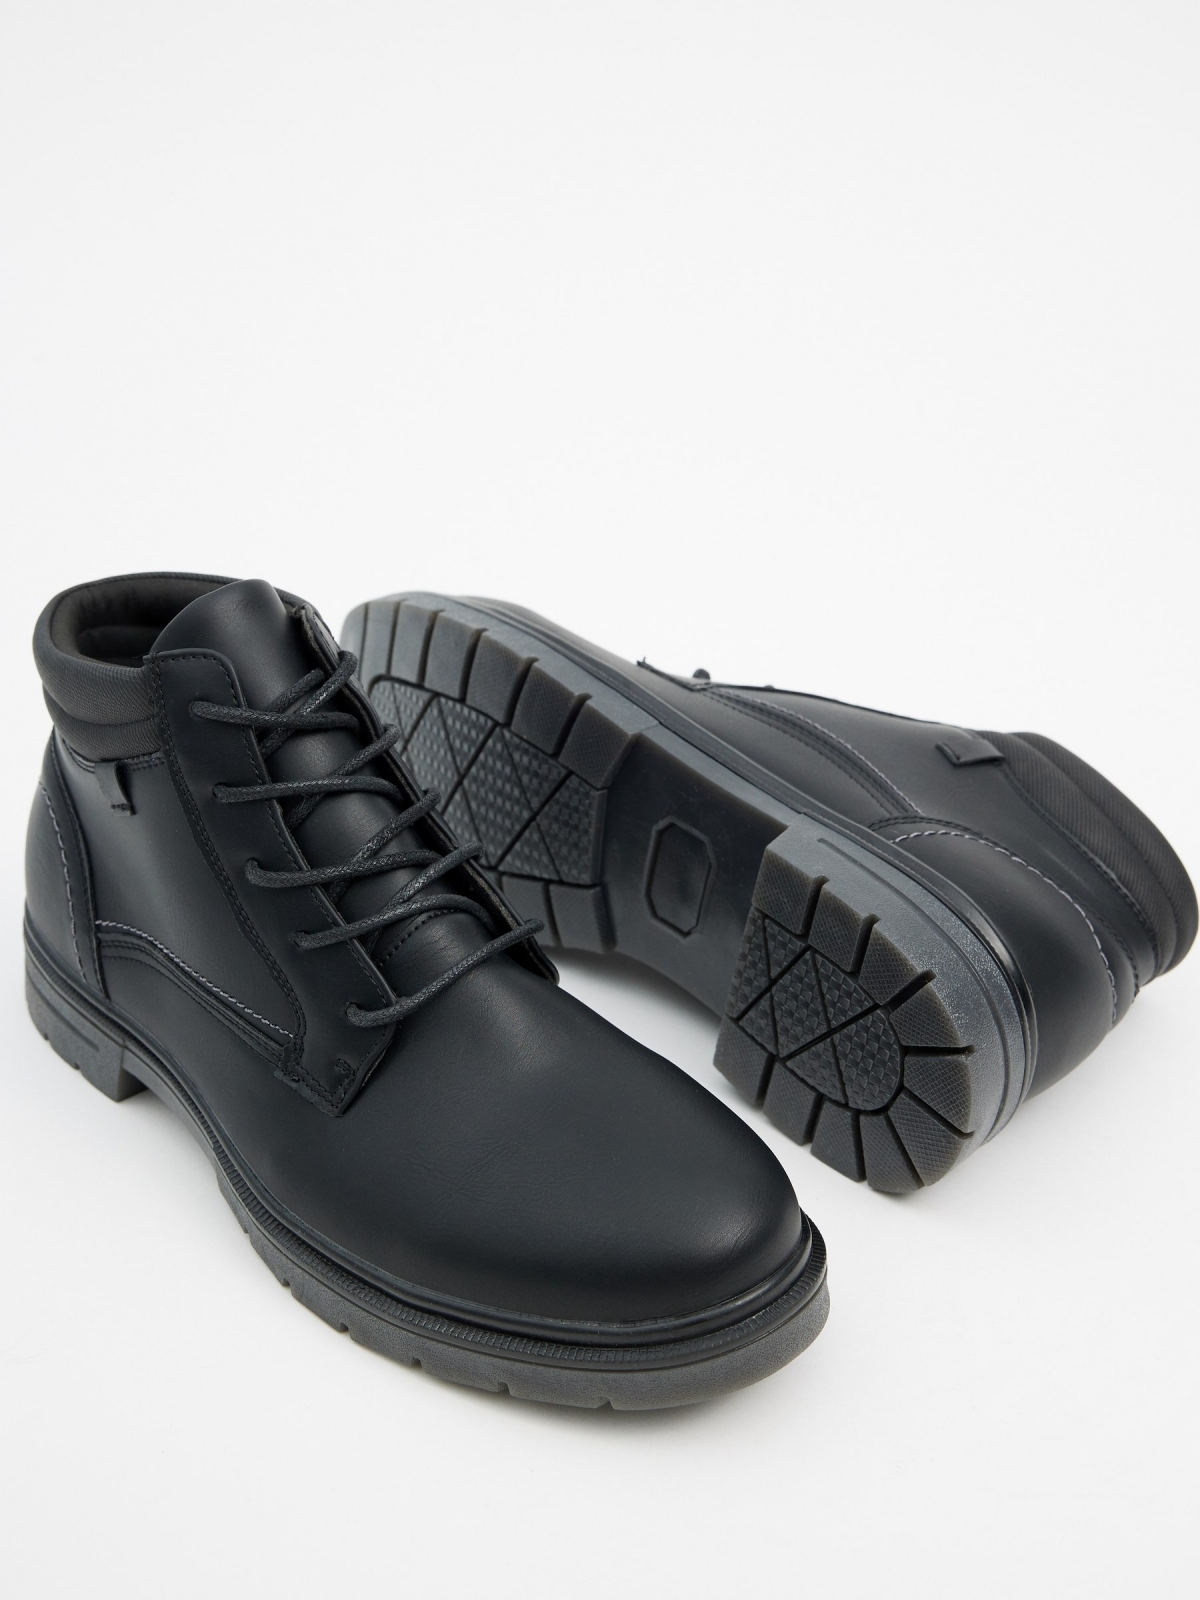 Black leather effect boots with stitching black detail view